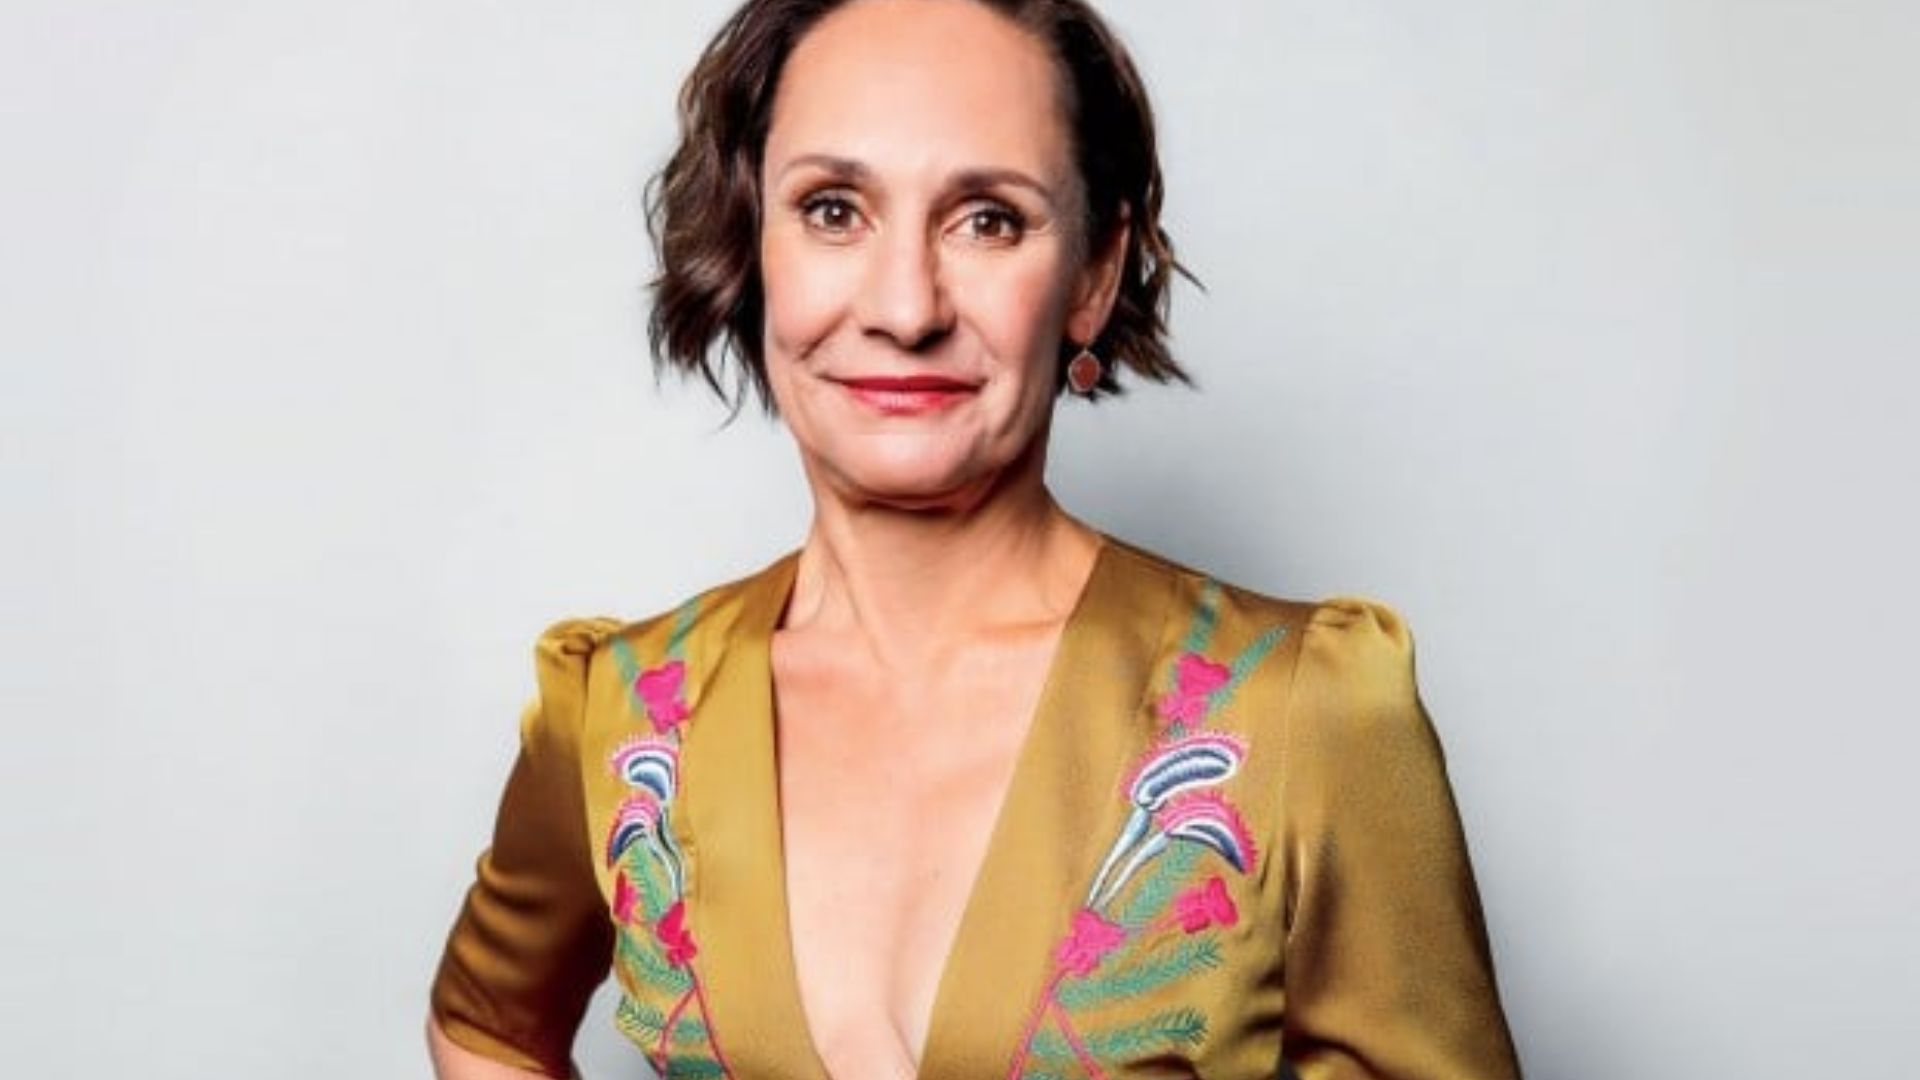 Laurie Metcalf’s Looking Straight In Camera